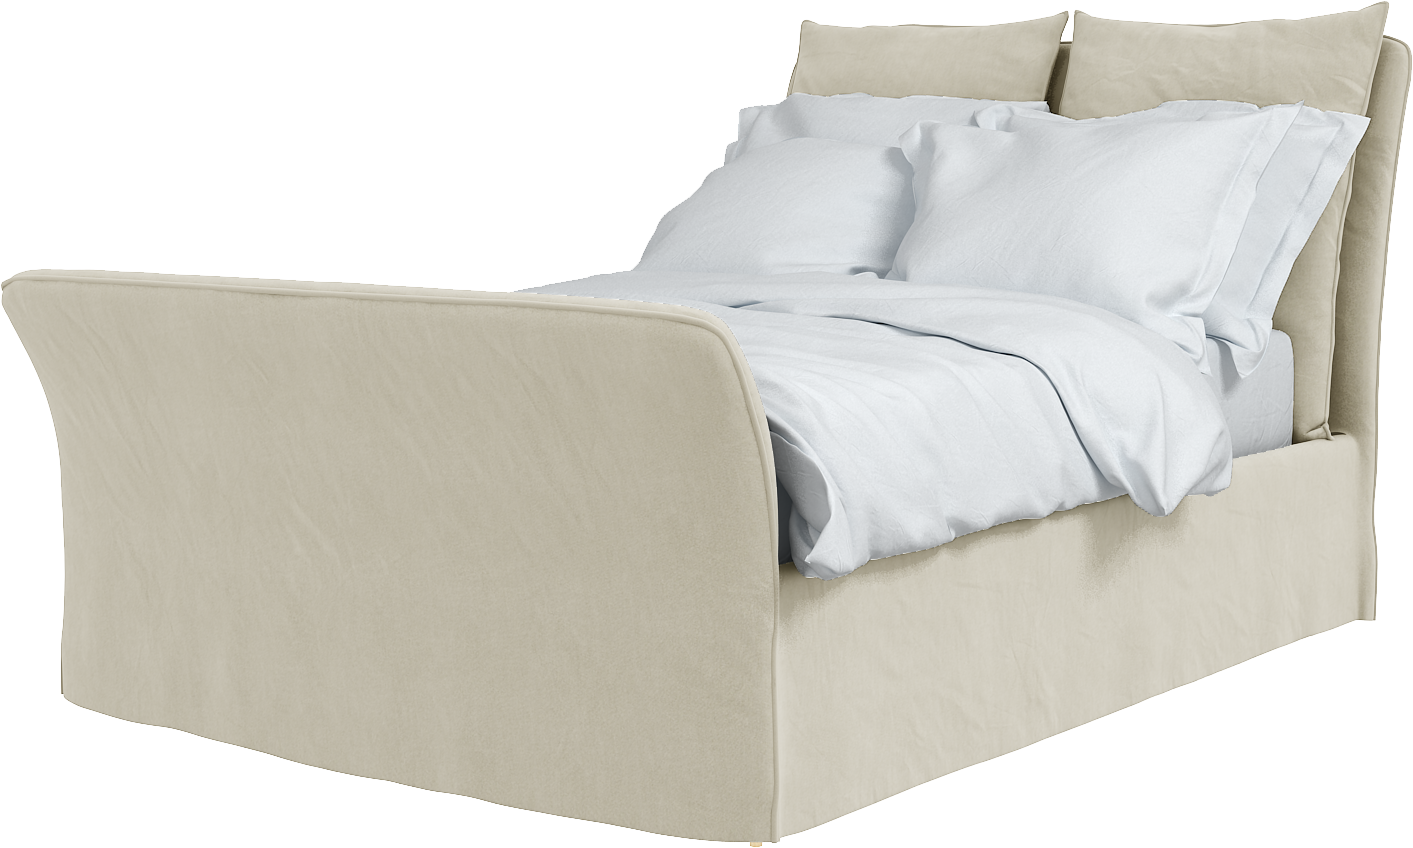 Double Footer Bed | Marnie Range